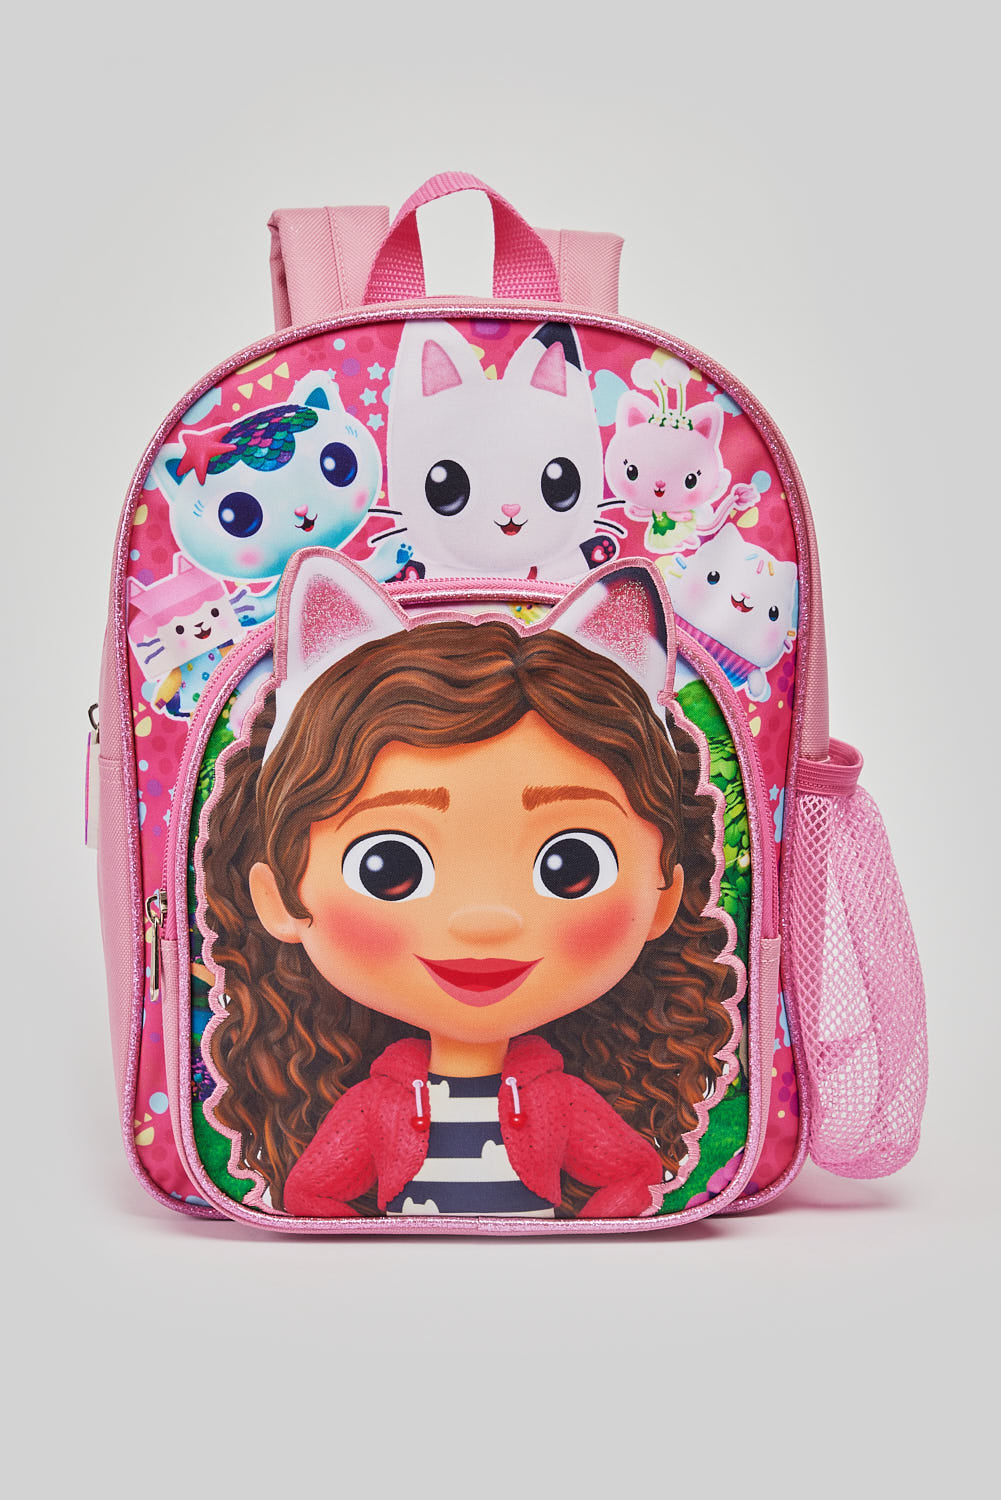 GABBY’S DOLL HOUSE ‘GABBY CATS’ ARCH BACKPACK-(36)